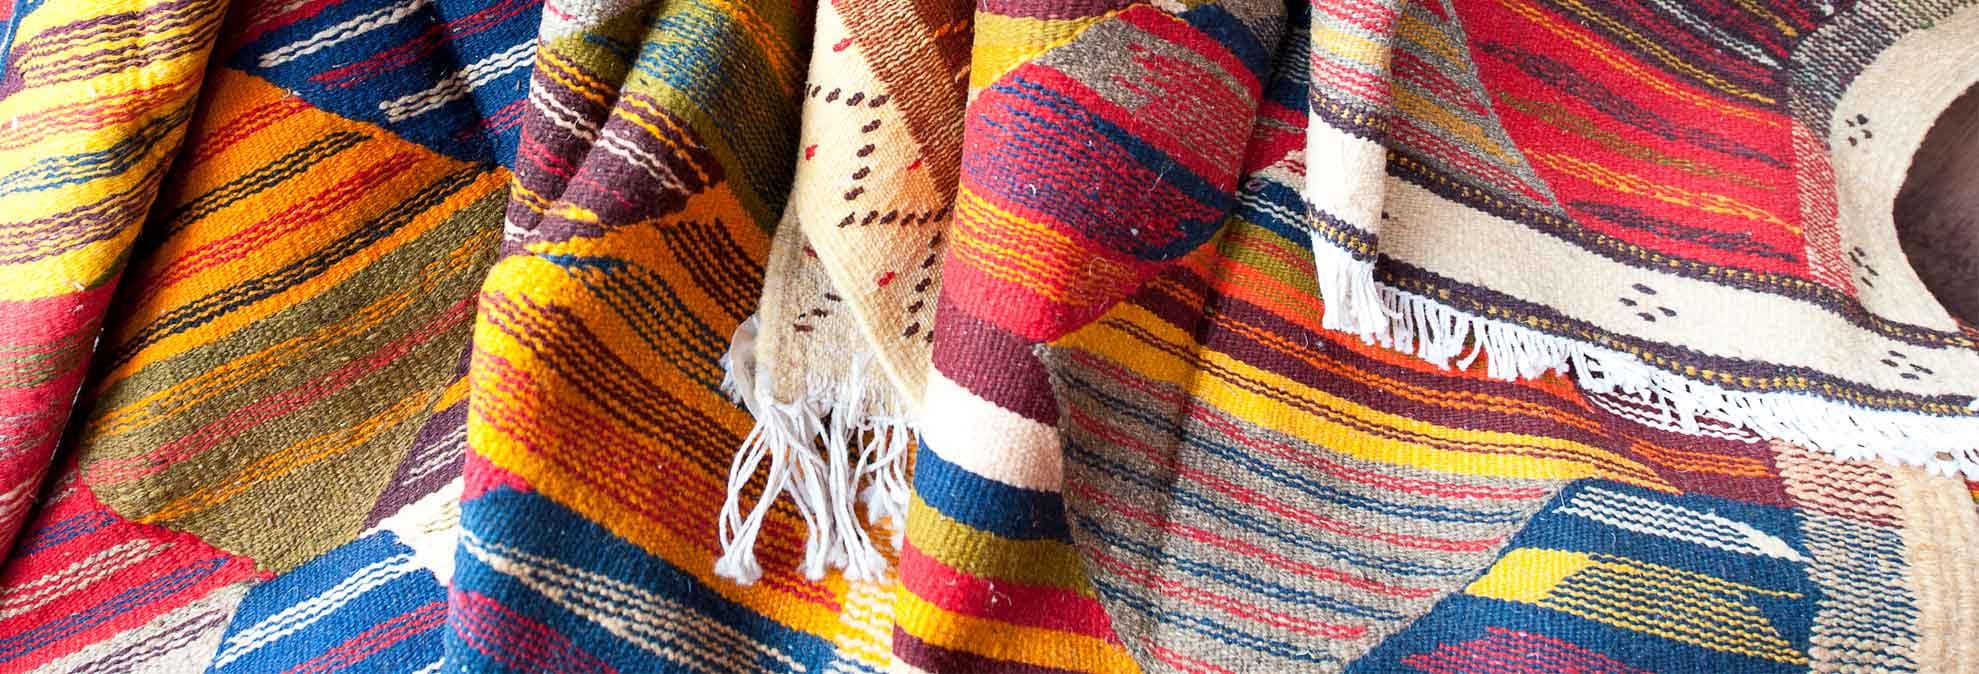 How To Care For Antique And Area Rugs Consumer Reports